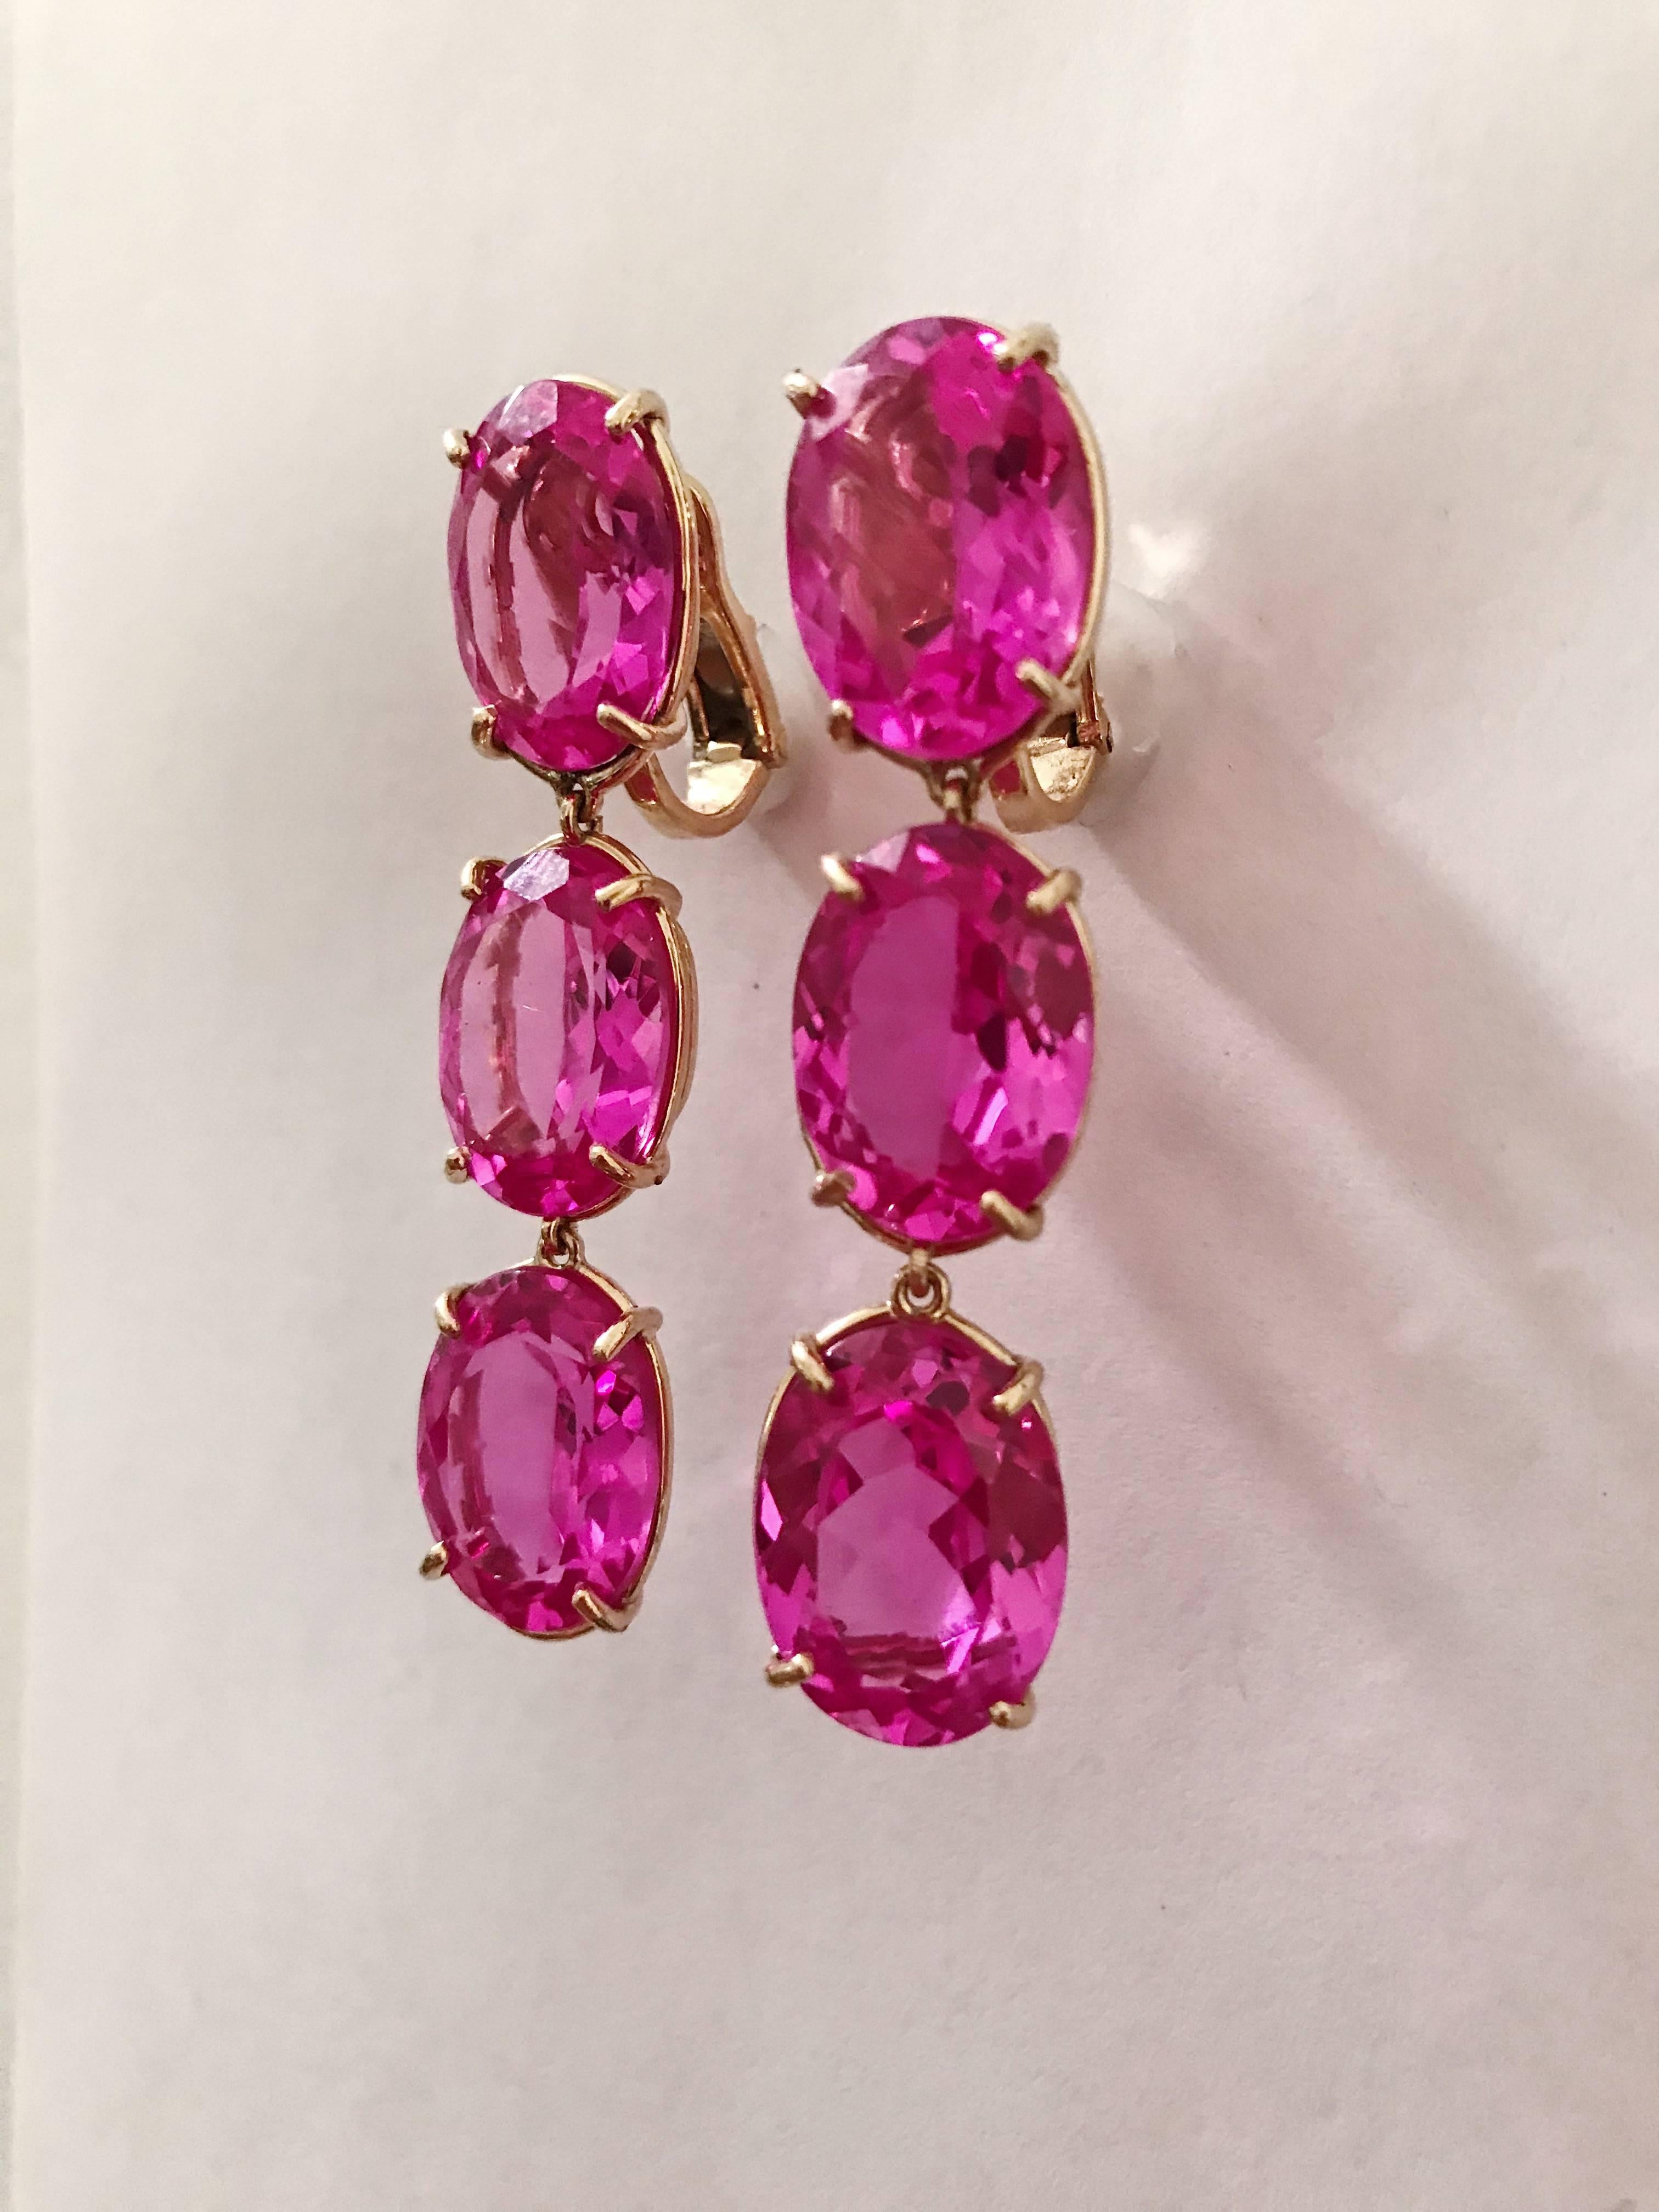 18kt Yellow Gold Elegant Three stone Drop Earrings with faceted oval Hot Pink Topaz. 

The Earrings measure 2 1/4 in length.

The earrings can be made for Clip Earring or Pierced Earrings.

They can also be custom made with and color stone